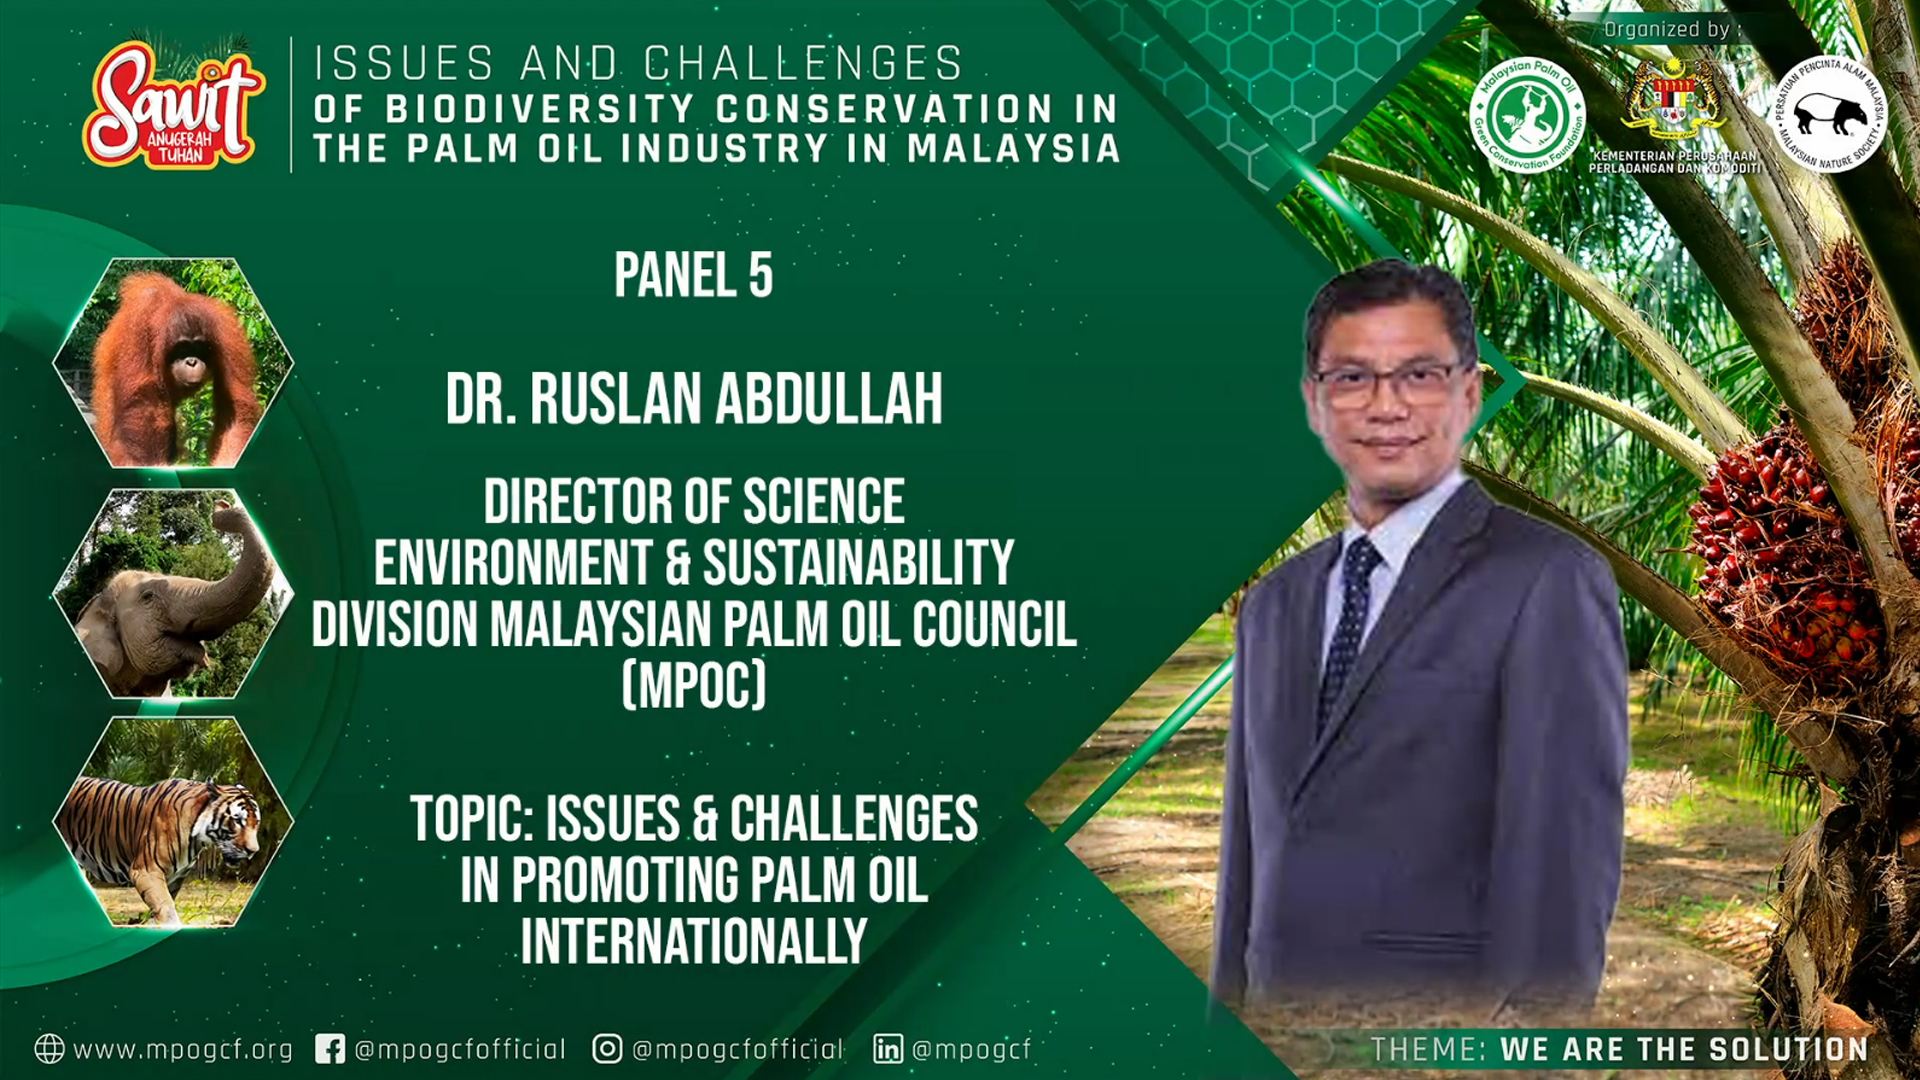 Issues and Challenges in Promoting Palm Oil Internationally by Dr Ruslan Abdullah